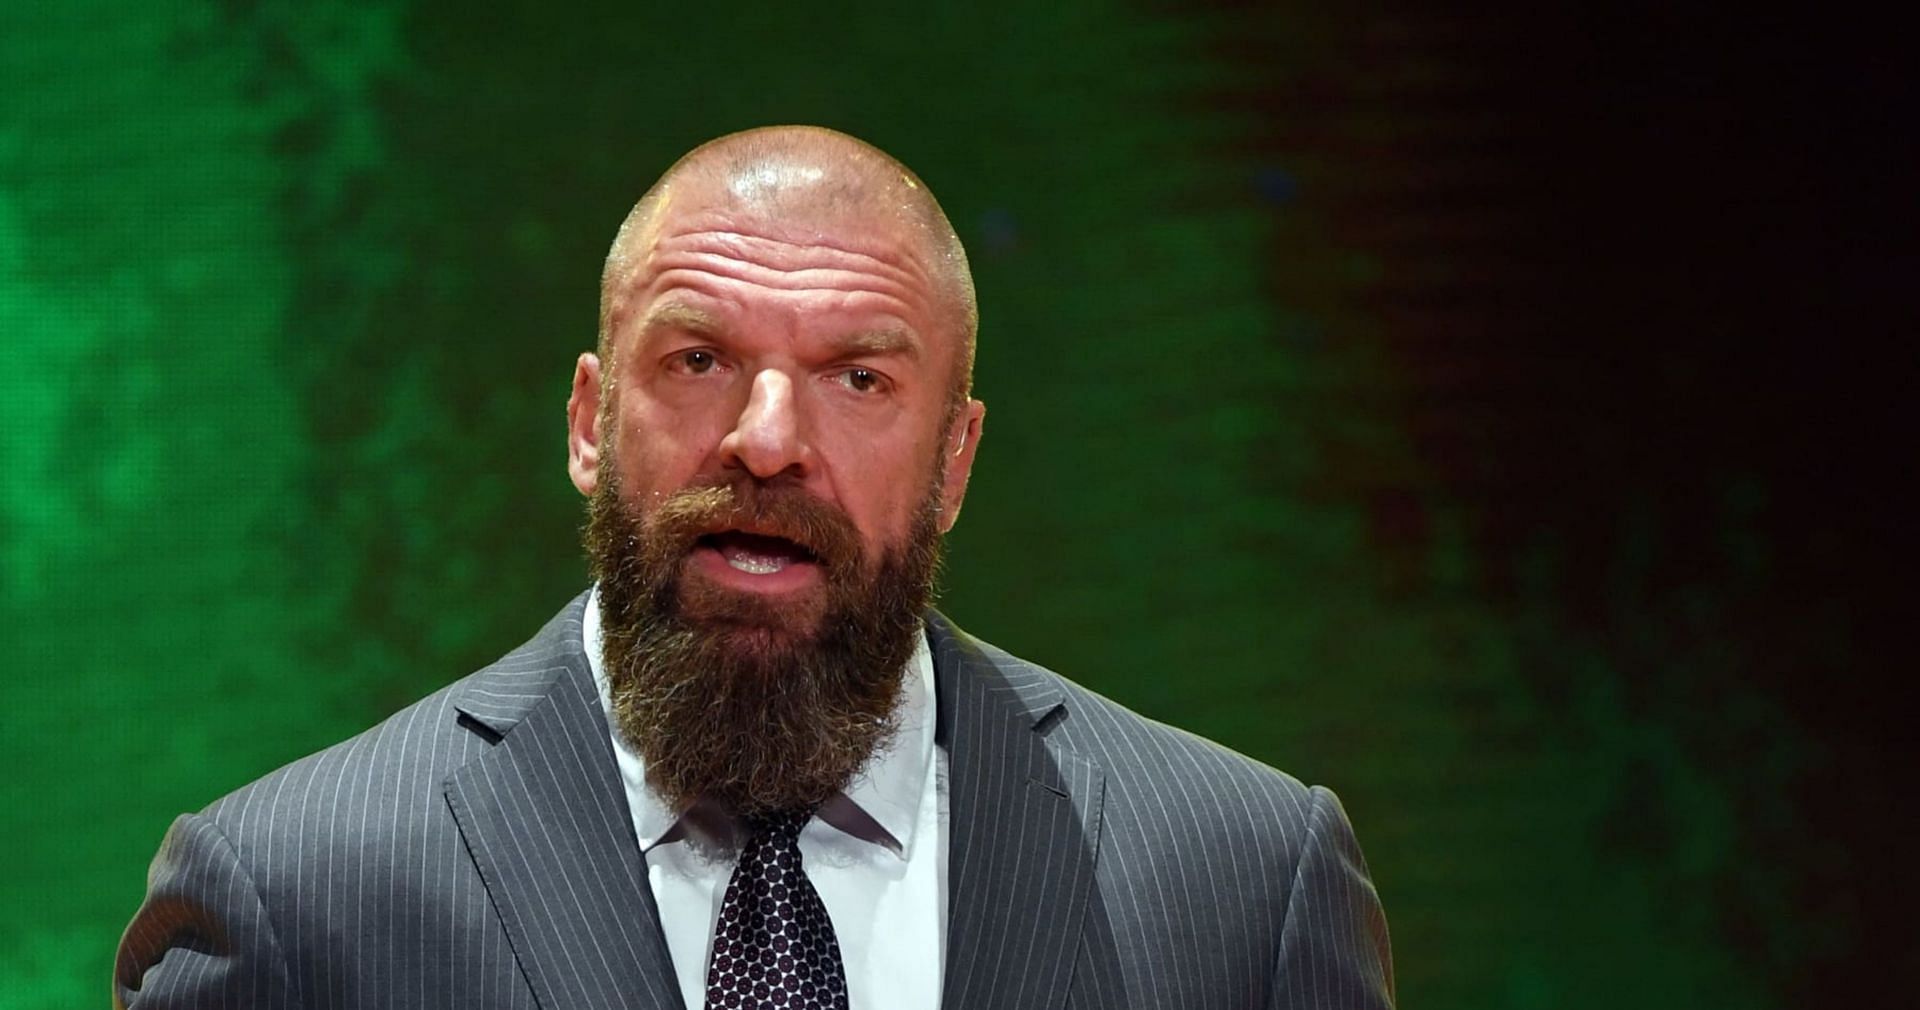 Triple H Has Been Re-Hiring Released Talent Since Taking Over As Head of Creative